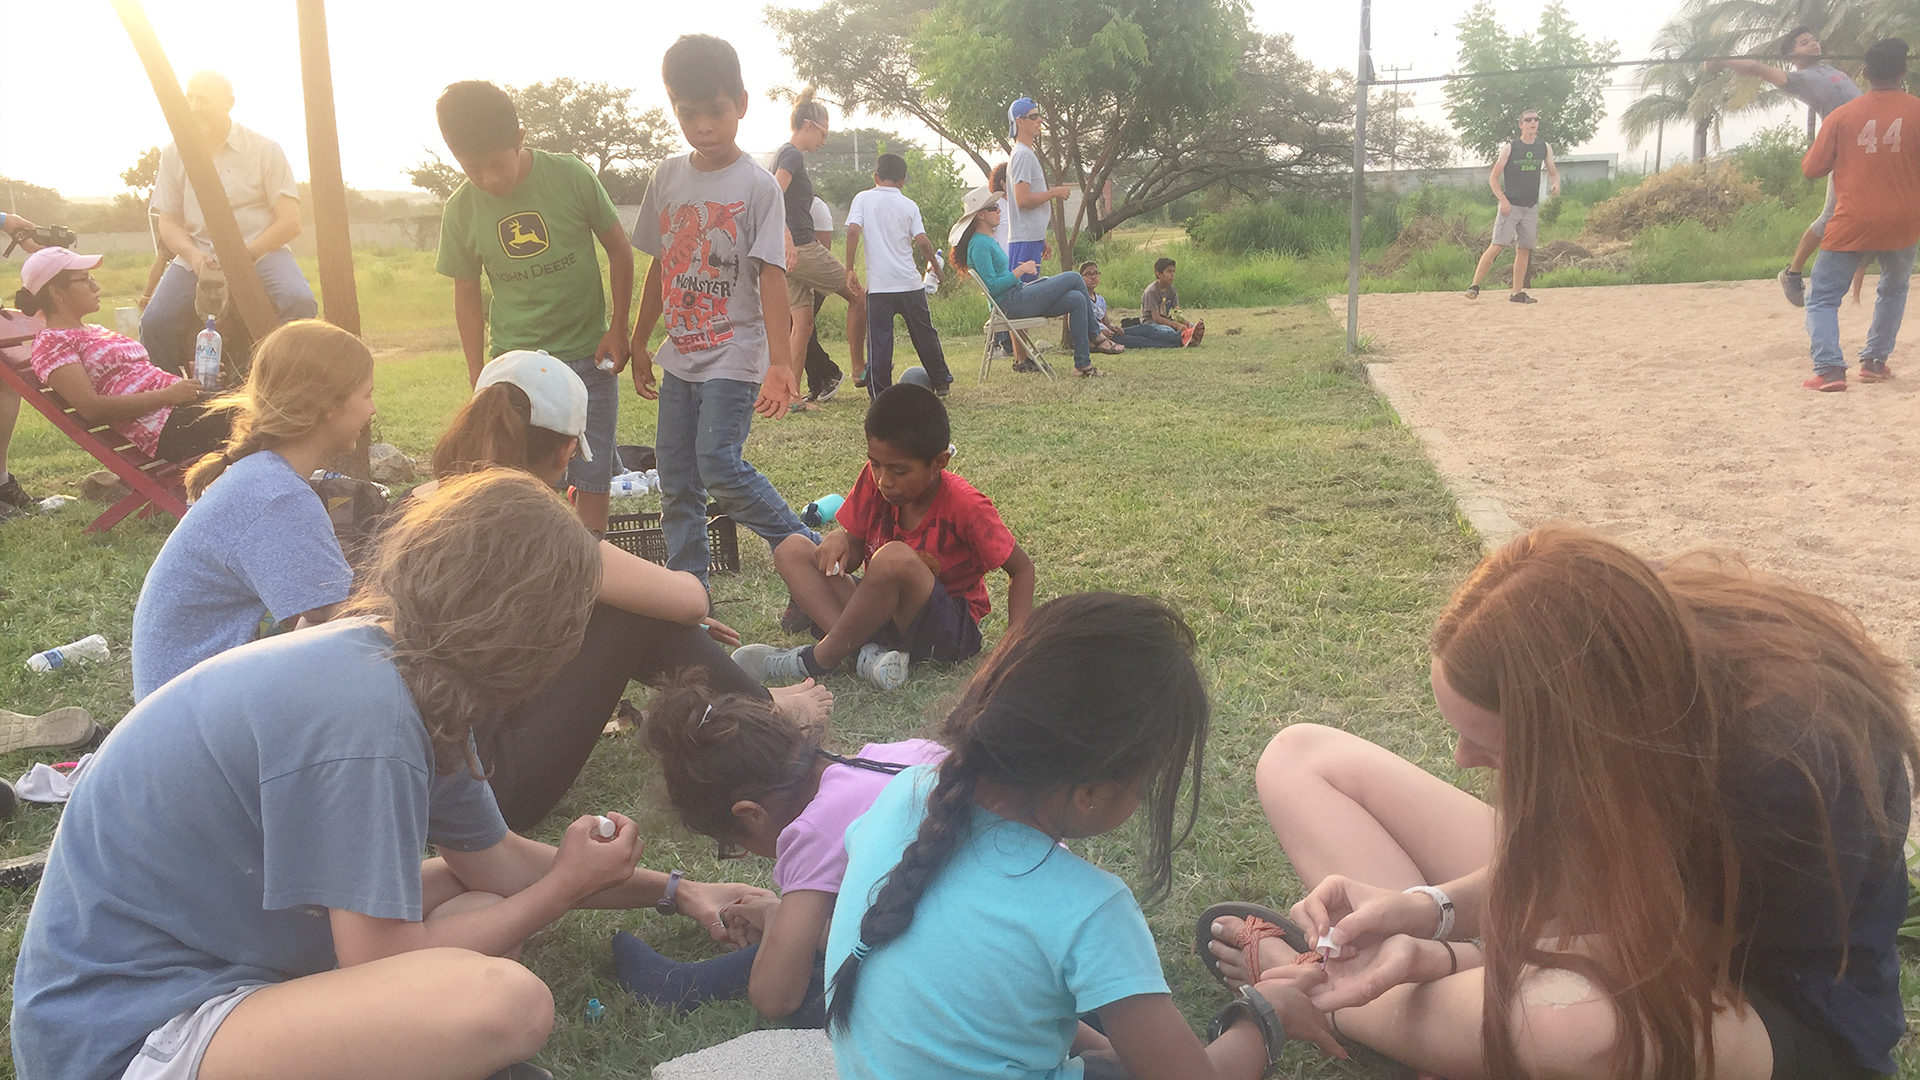 20180726 Students Mission Trip Mexico 002 crop.jpg